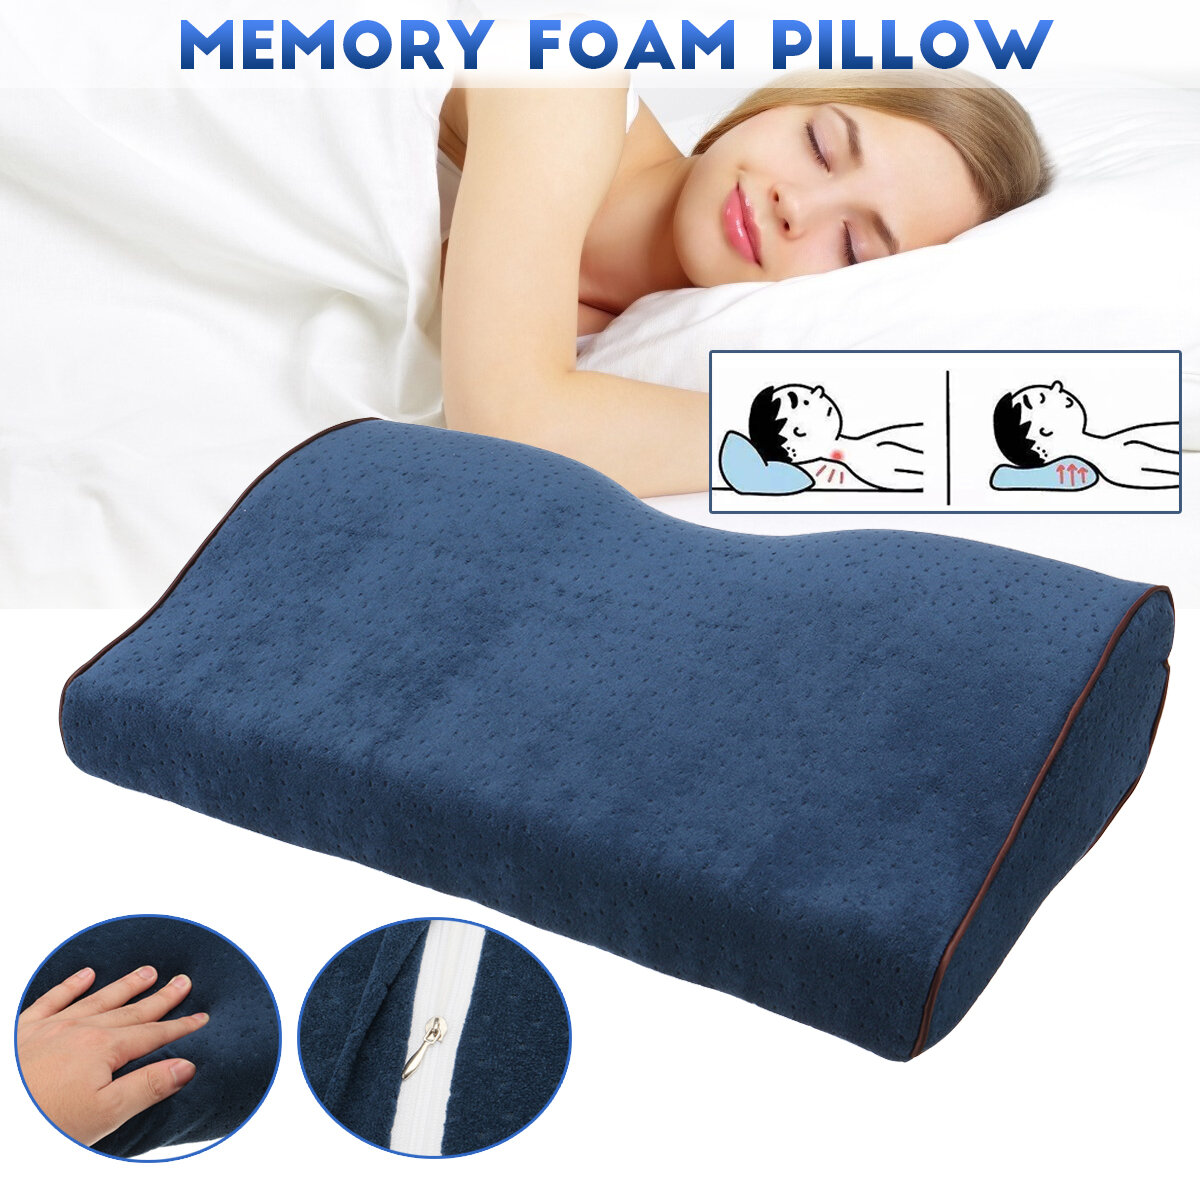 50*30*10cm Memory Foam Pillow for Neck Pain Relief Ergonomic Bed Pillow with Washable Anti-Pilling Pillowcase